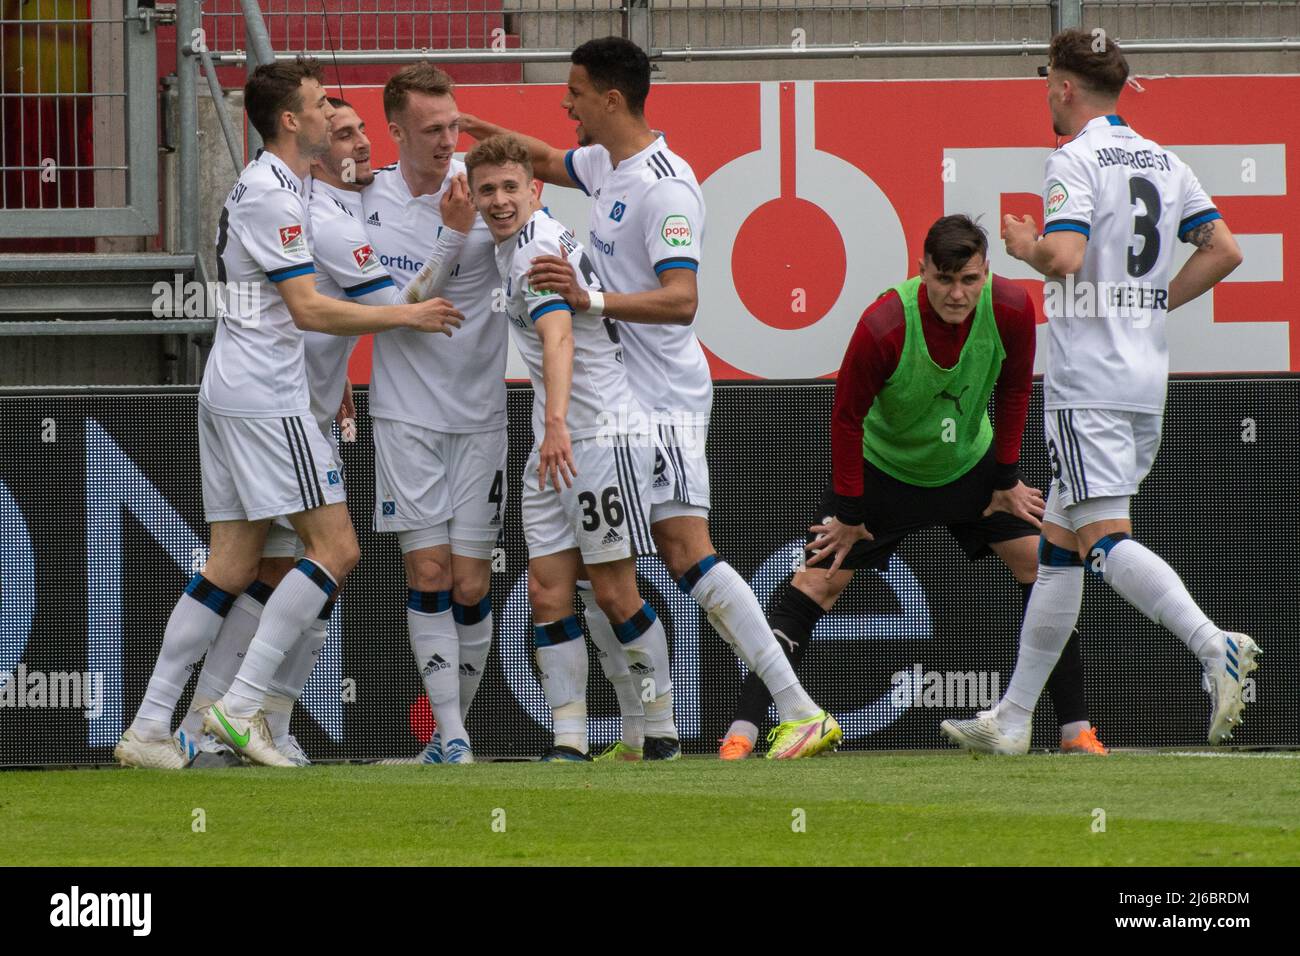 Germany. 30th Apr, 2022. 30 April 2022, Bavaria, Ingolstadt: Soccer: 2nd Bundesliga, FC Ingolstadt 04 - Hamburger SV, Matchday 32, Audi Sportpark. Hamburg's (l-r) Jonas Meffert, Ludovit Reis, Sebastian Schonlau, Anssi Suhonen, Robert Glatzel and Moritz Heyer cheer after the 0:2. Photo: Stefan Puchner/dpa - IMPORTANT NOTE: In accordance with the requirements of the DFL Deutsche Fußball Liga and the DFB Deutscher Fußball-Bund, it is prohibited to use or have used photographs taken in the stadium and/or of the match in the form of sequence pictures and/or video-like photo series. Credit: dpa pict Stock Photo